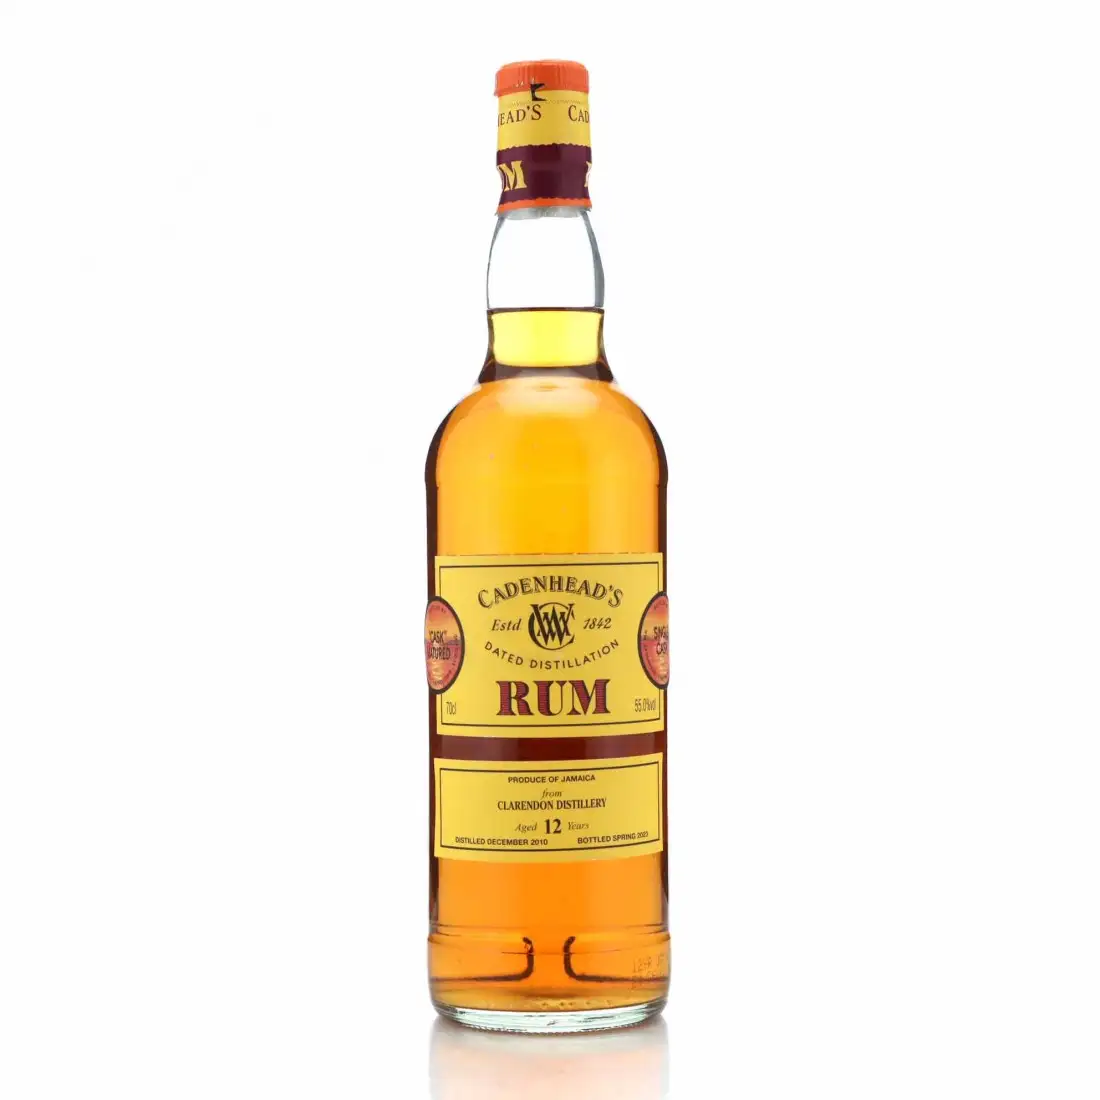 Image of the front of the bottle of the rum Clarendon Distillery